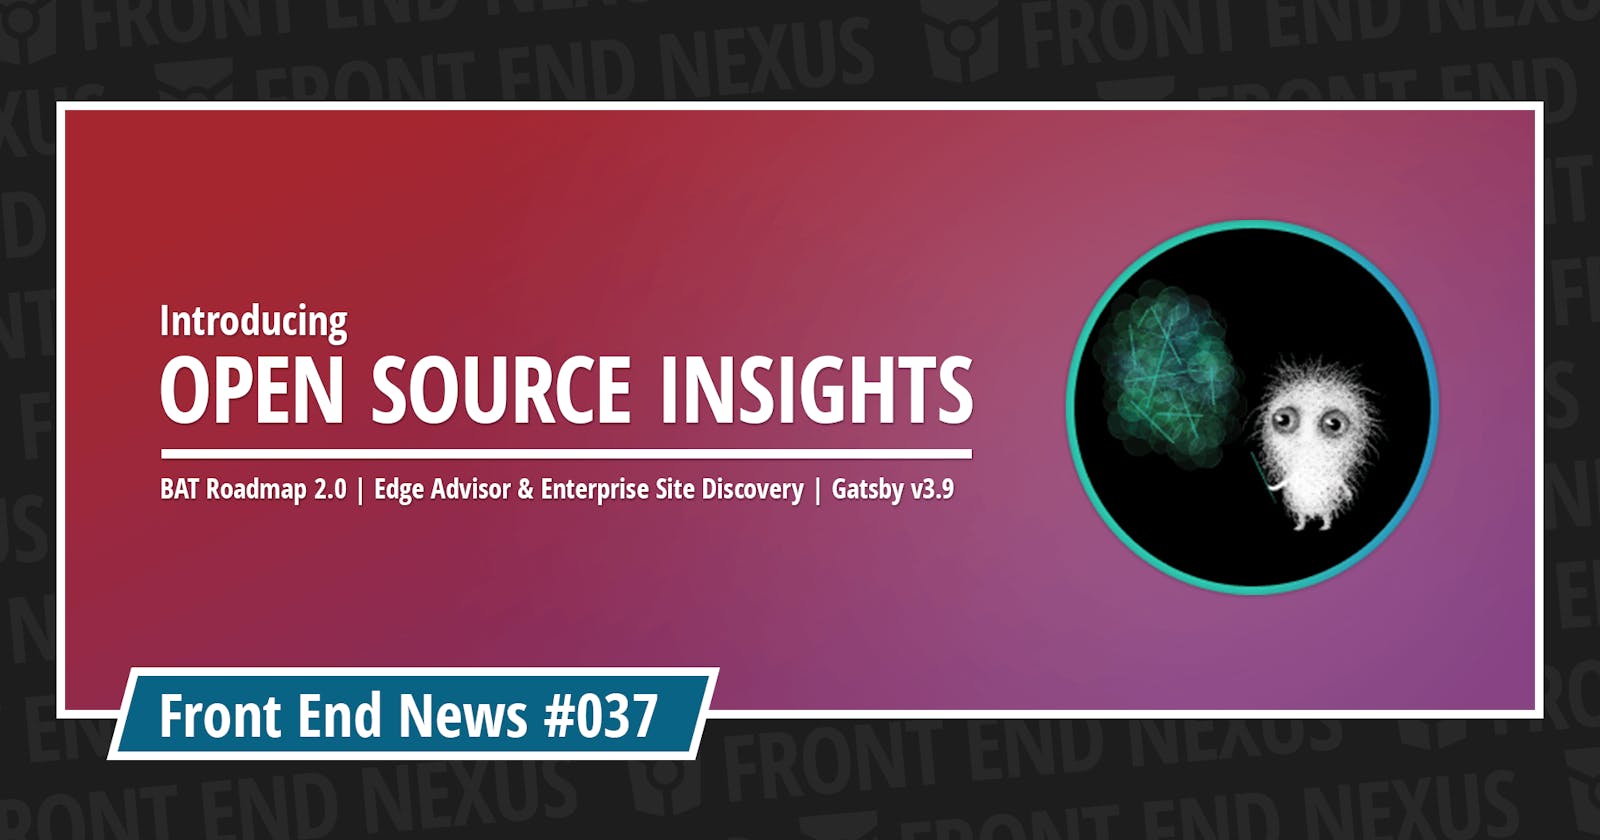 Open Source Insights, BAT Roadmap 2.0 Update 2, Tools for migration to Microsoft Edge, and Gatsby v3.9 | Front End News #037